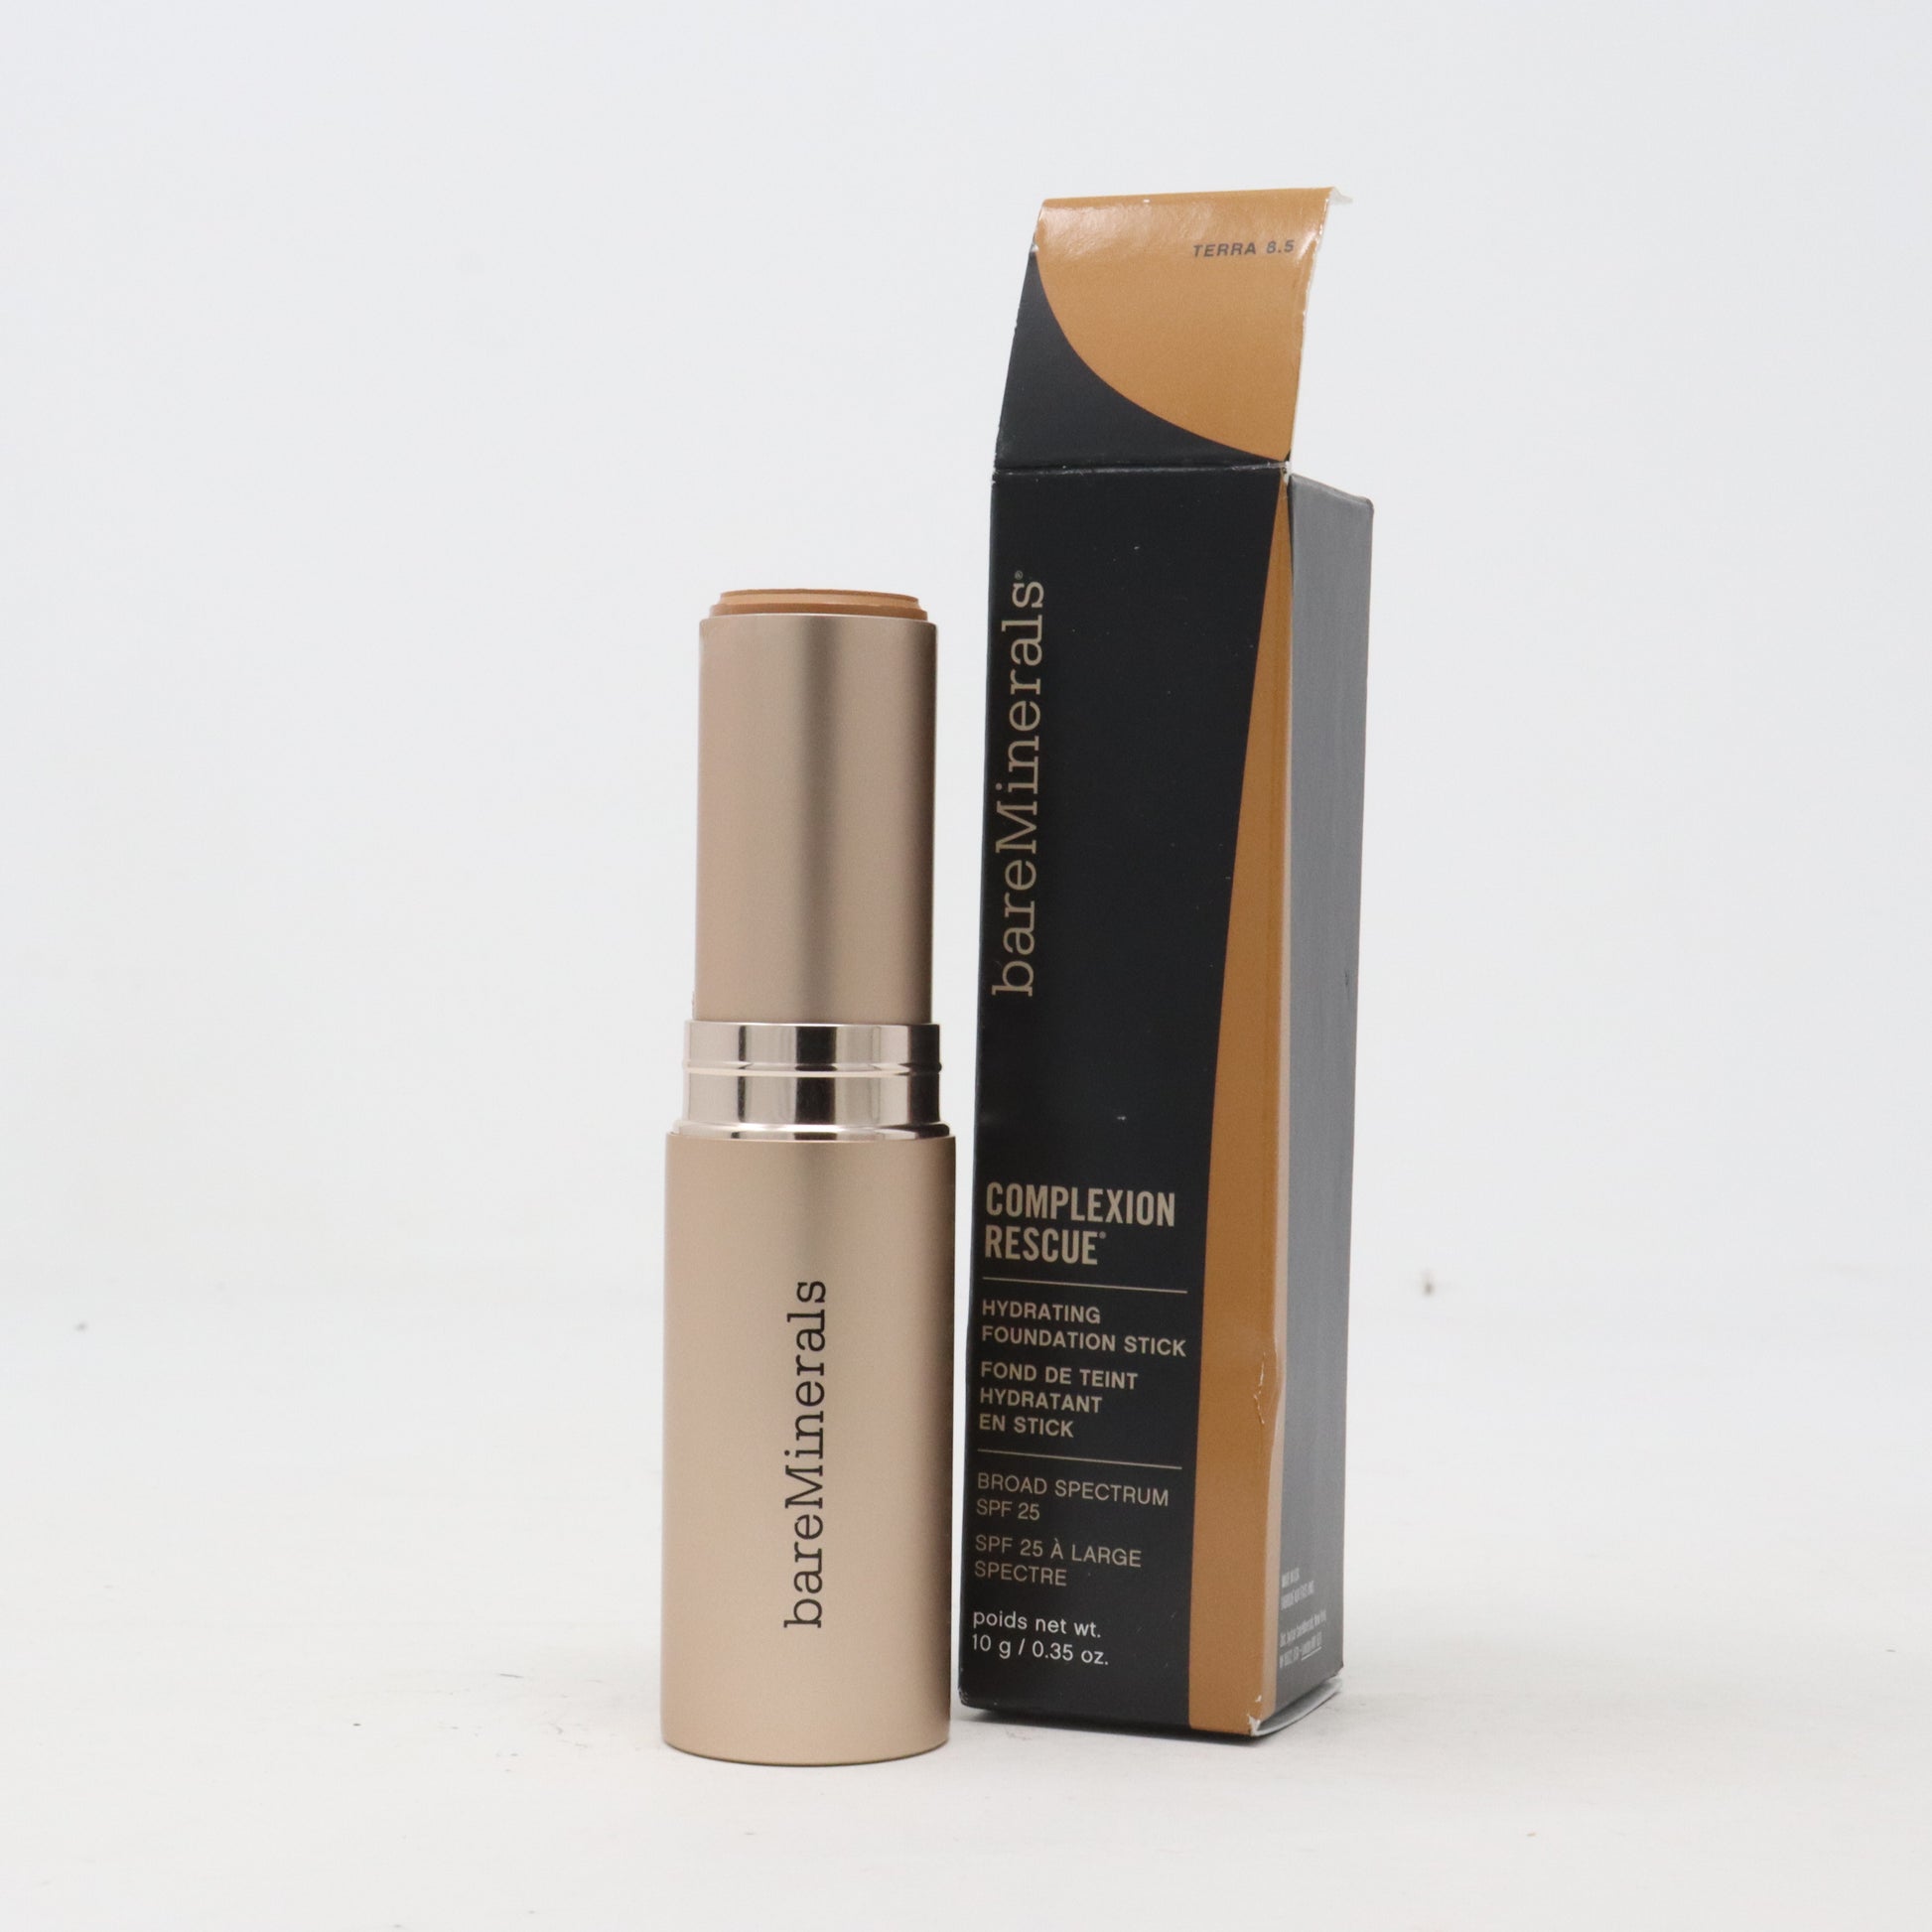 Complexion Rescue Hydrating Foundation Stick 10 g